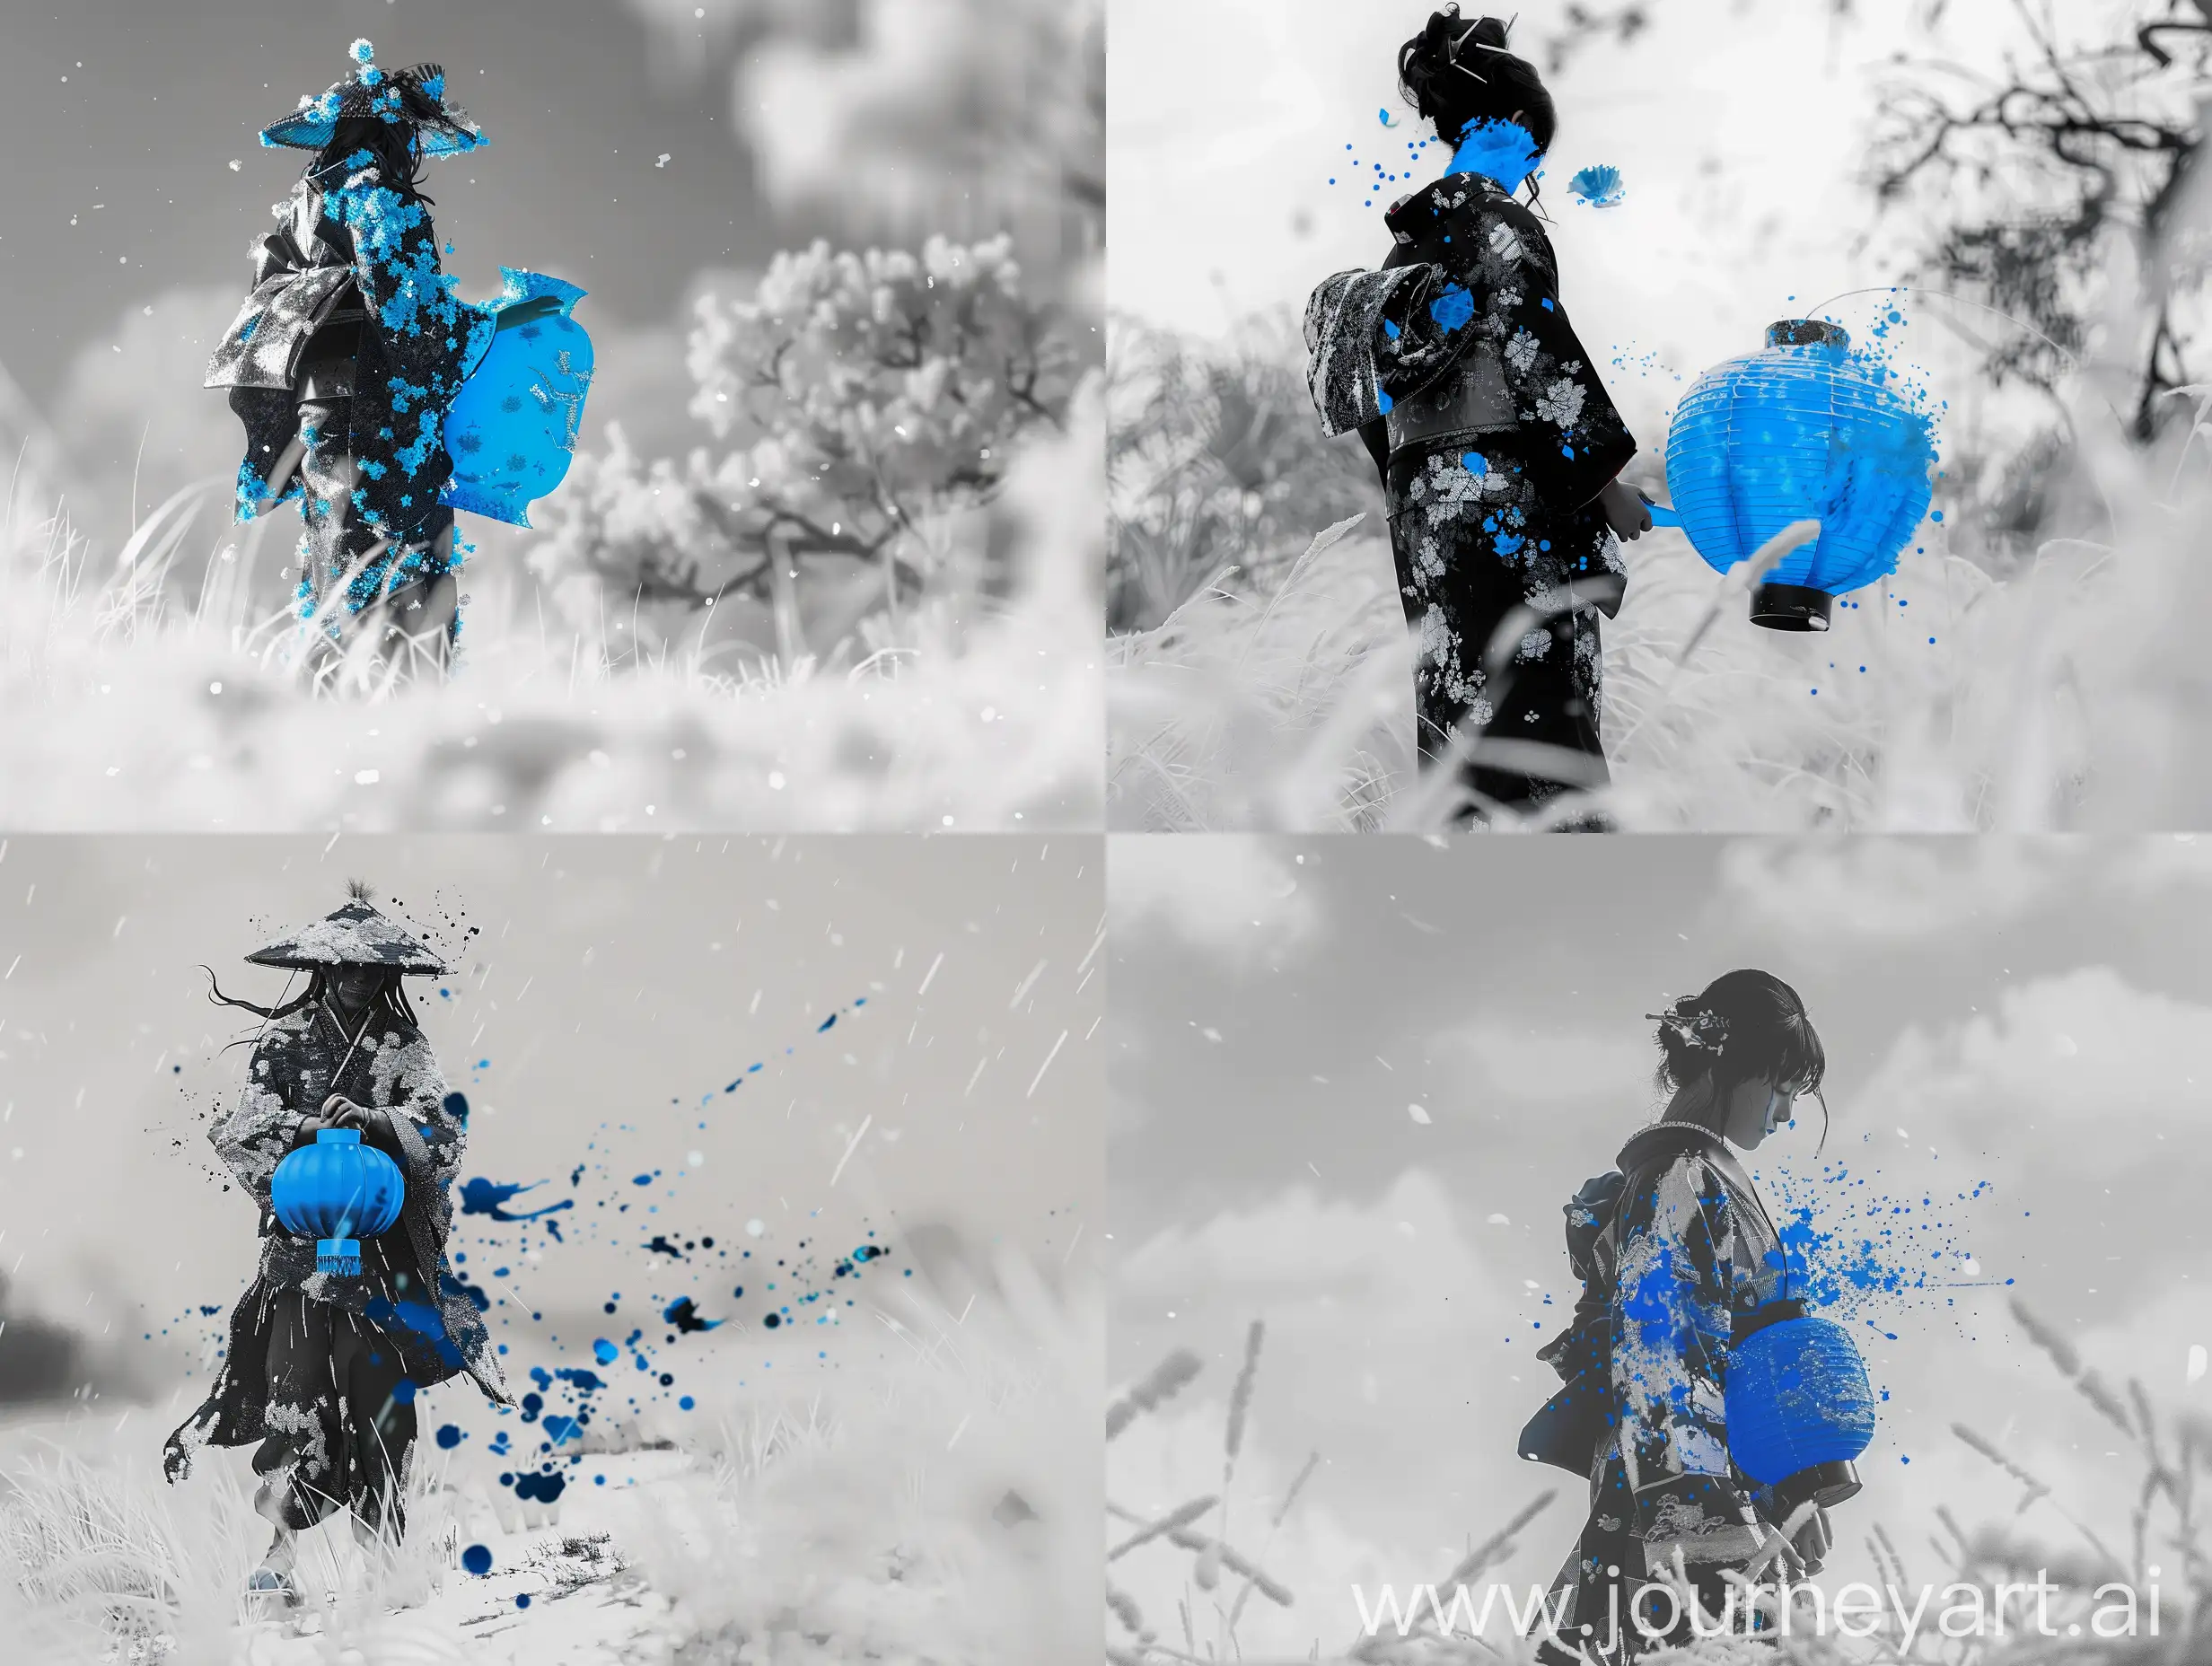 a lady in japanese costume with a blue lantern standing alone in a white frosty field. Whole scene is black and white just the lantern is blue colored and lady is splashed with blue also, 4K realistic close up shot